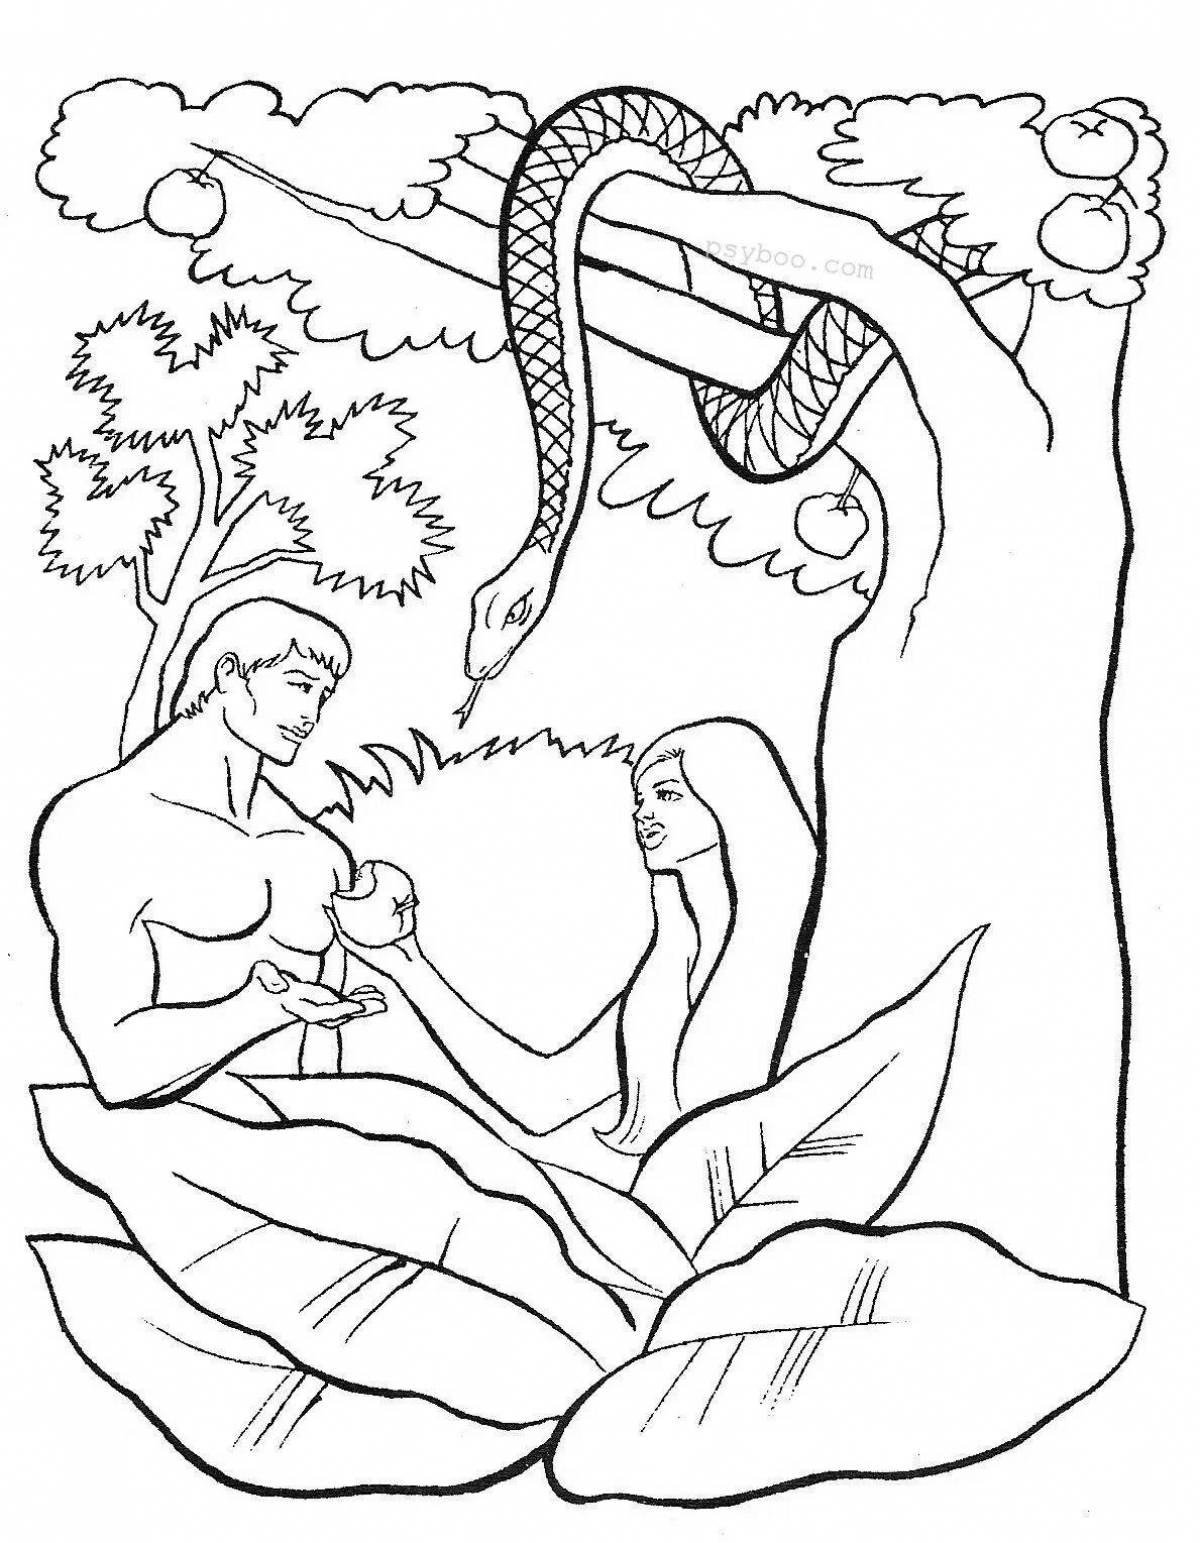 Incredible coloring page land of myths